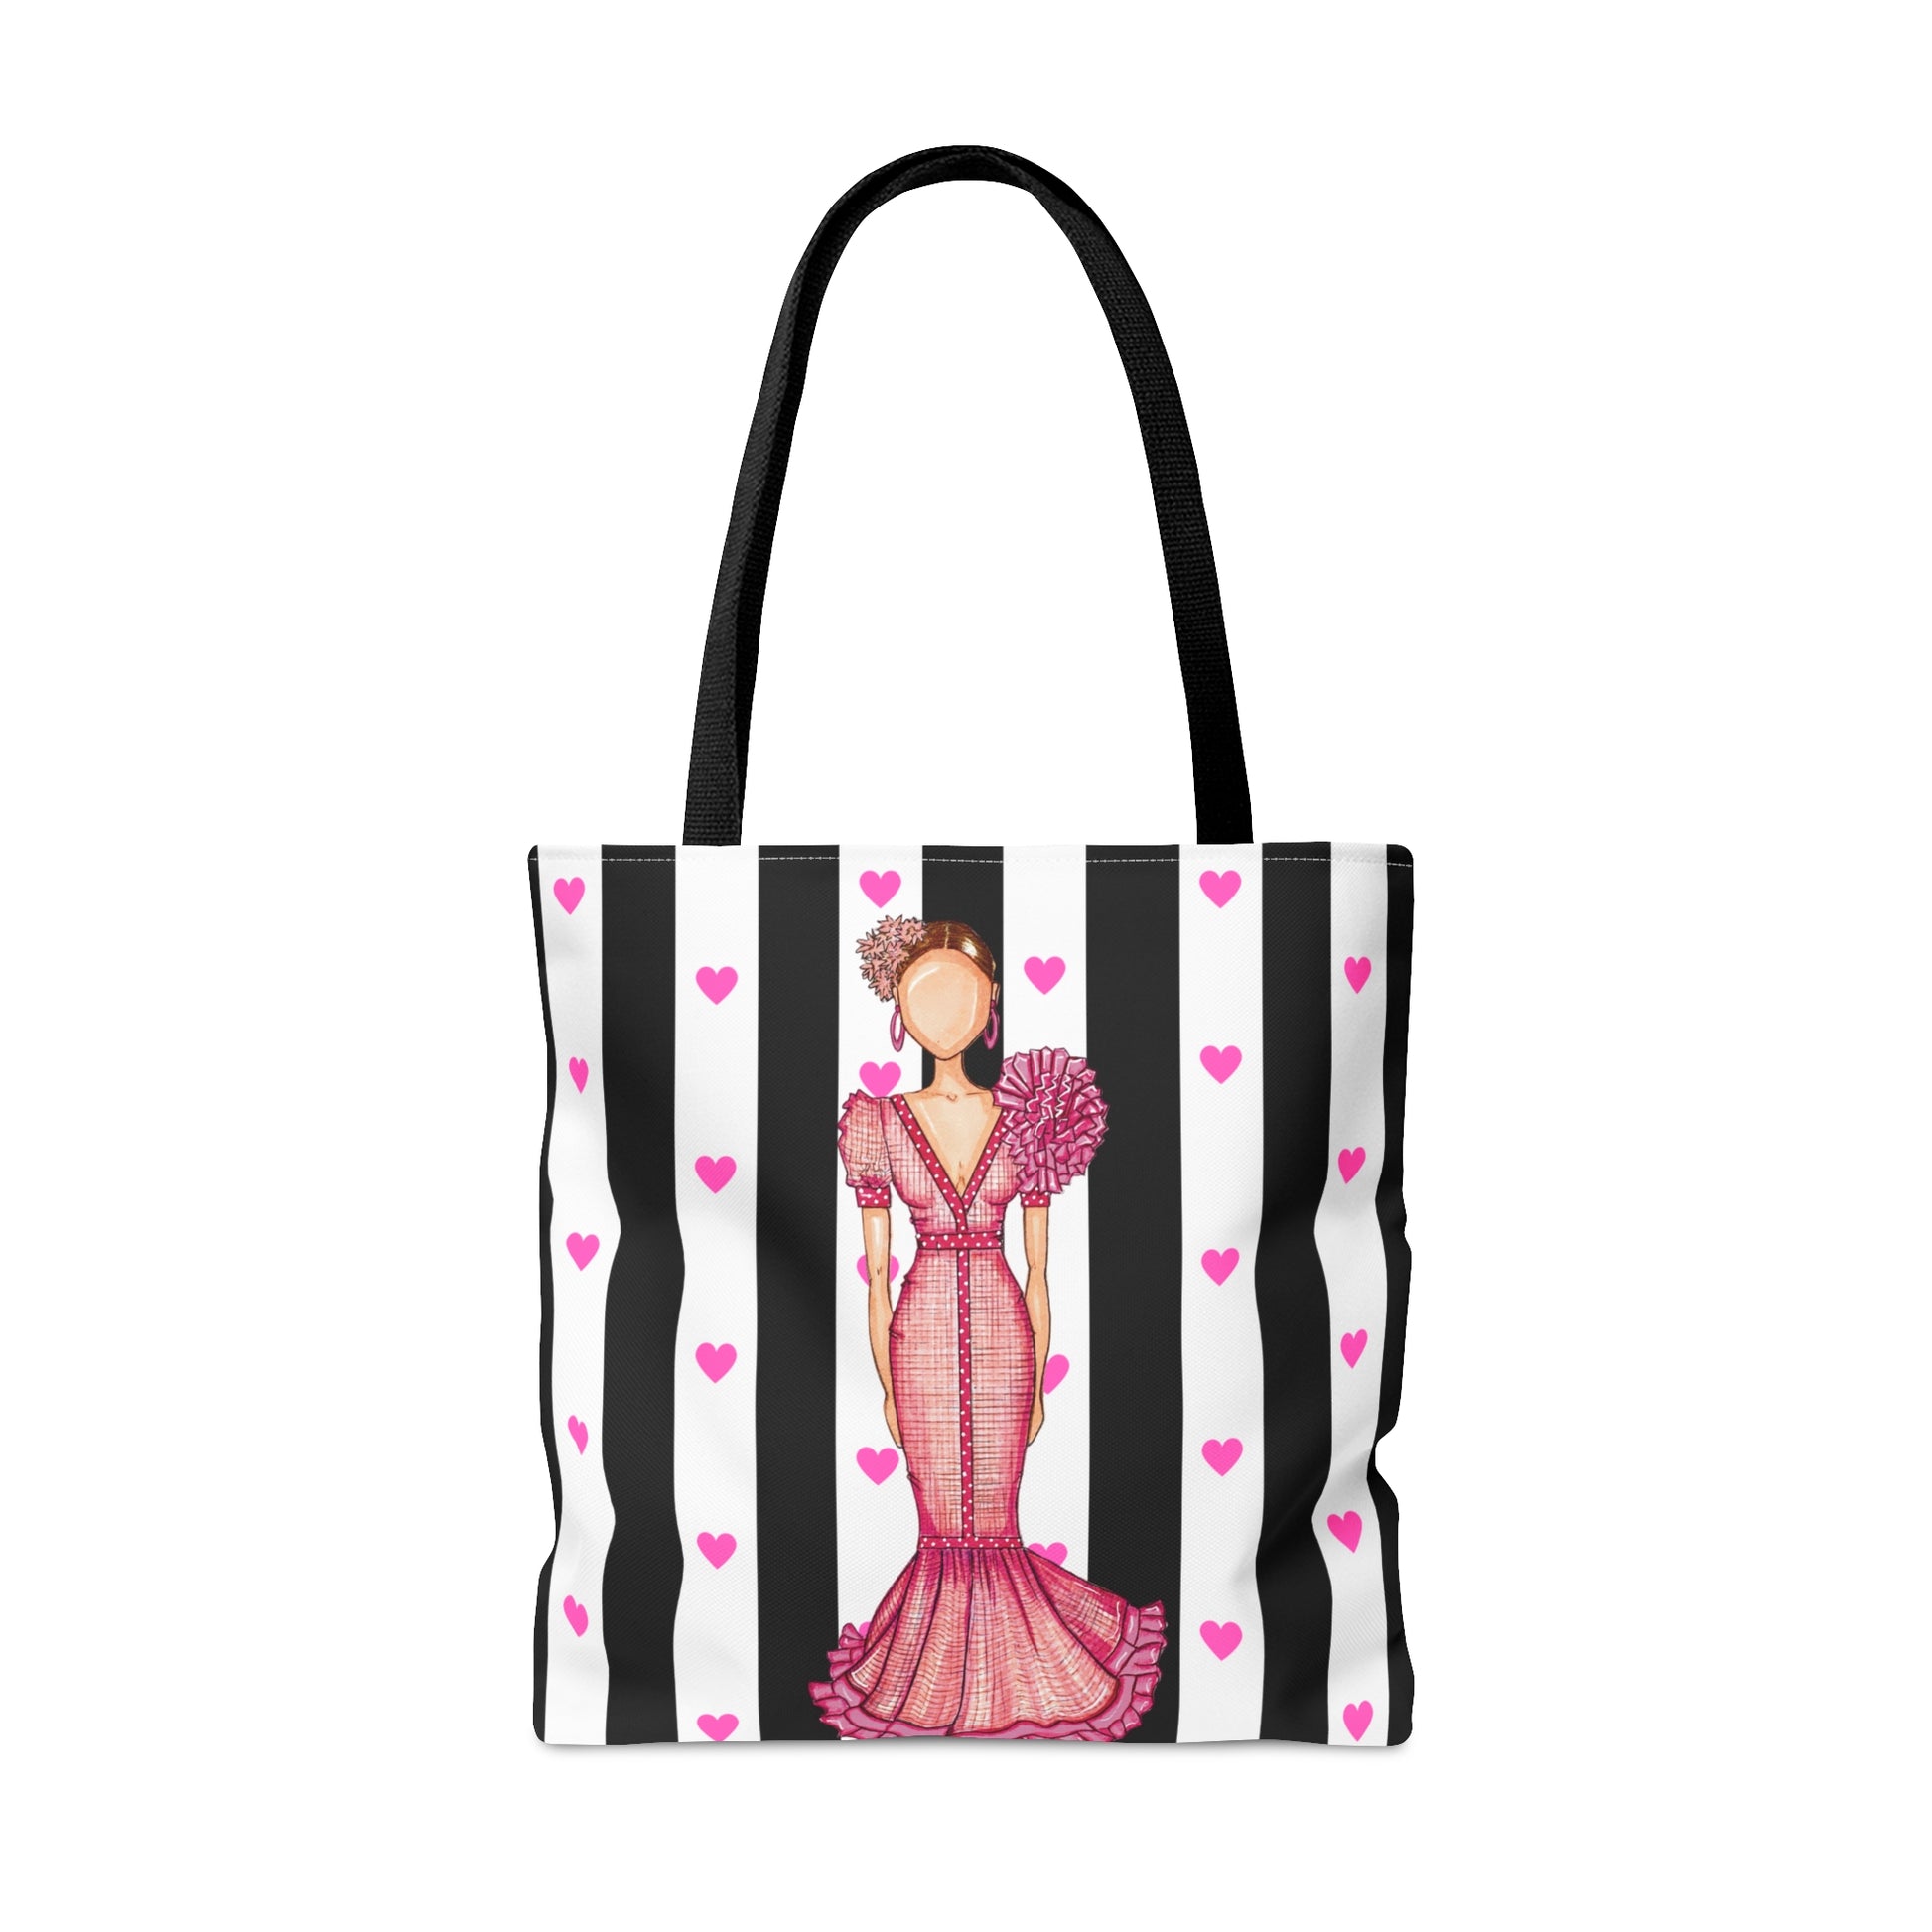 a black and white striped bag with a woman in a pink dress